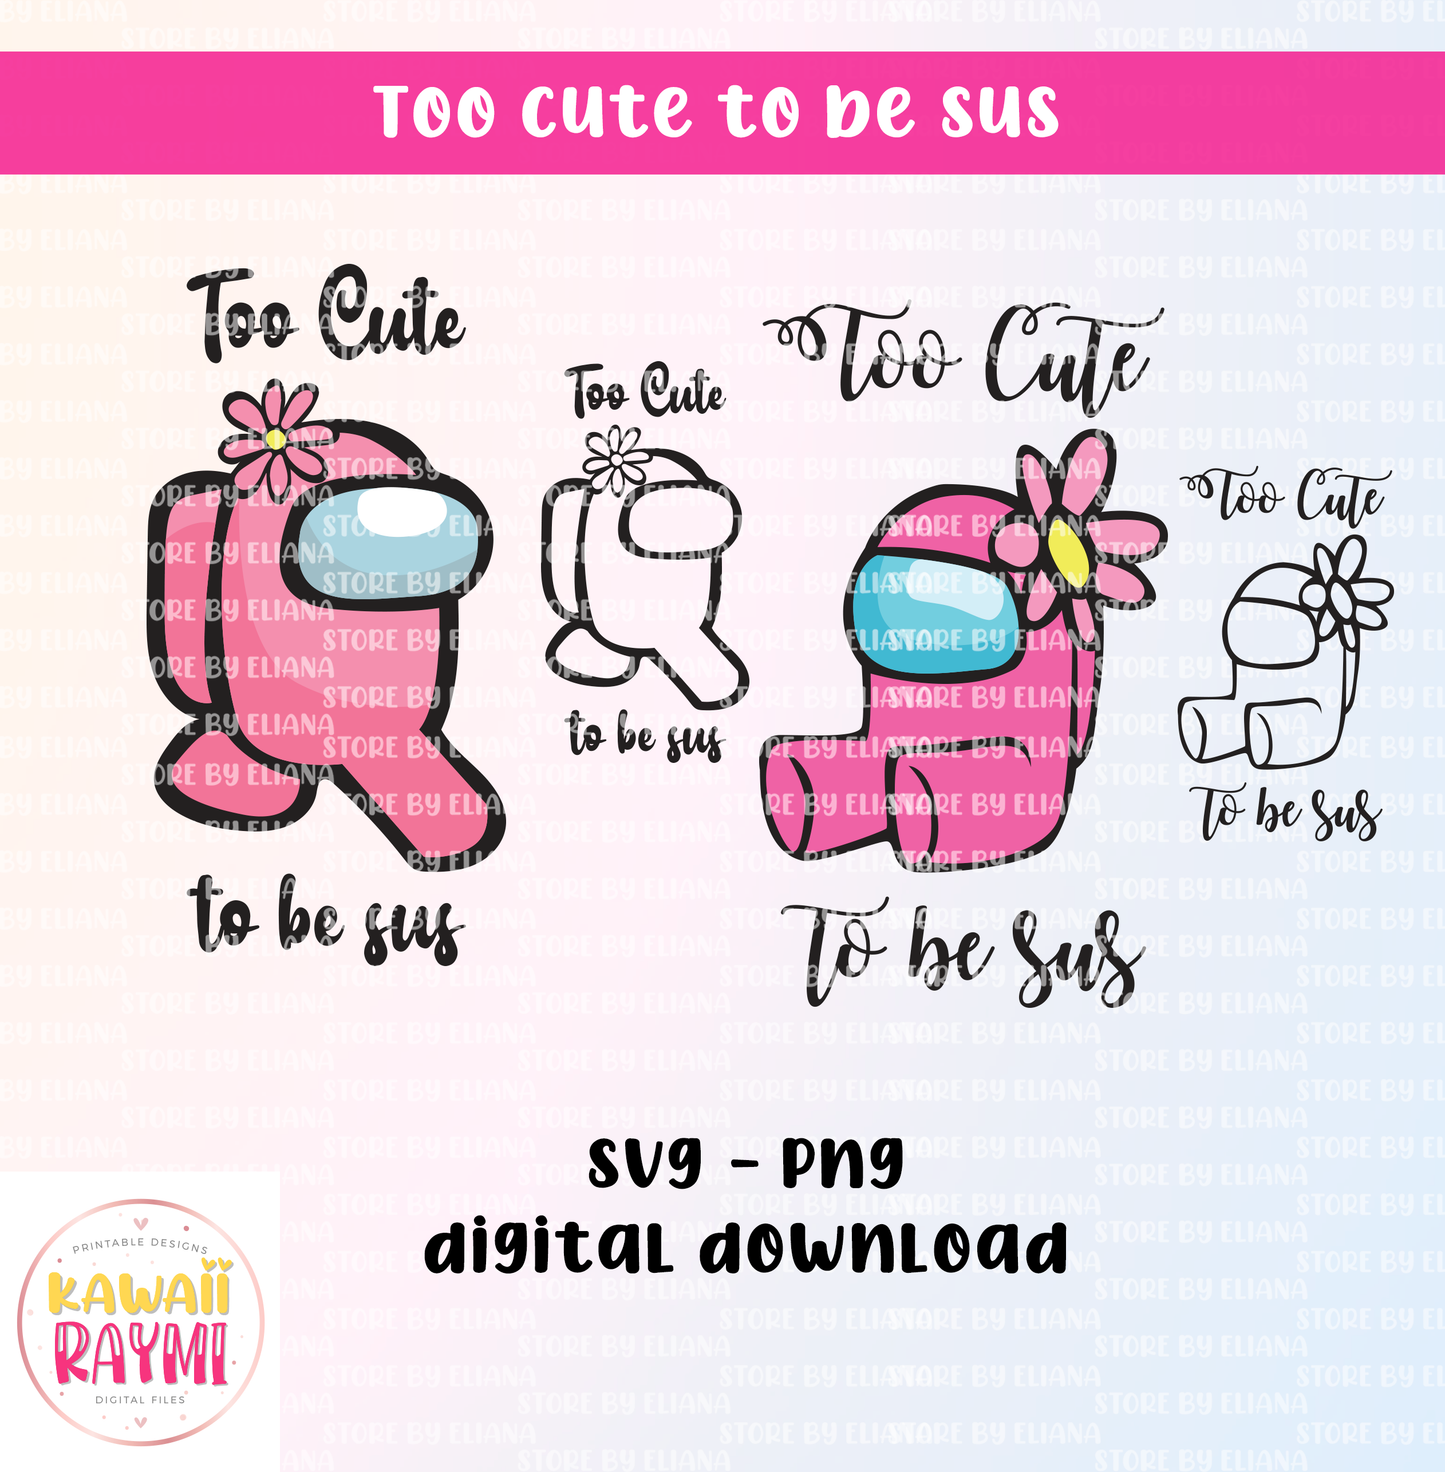 Among us too cute to be sus SVG, png, clipart among us